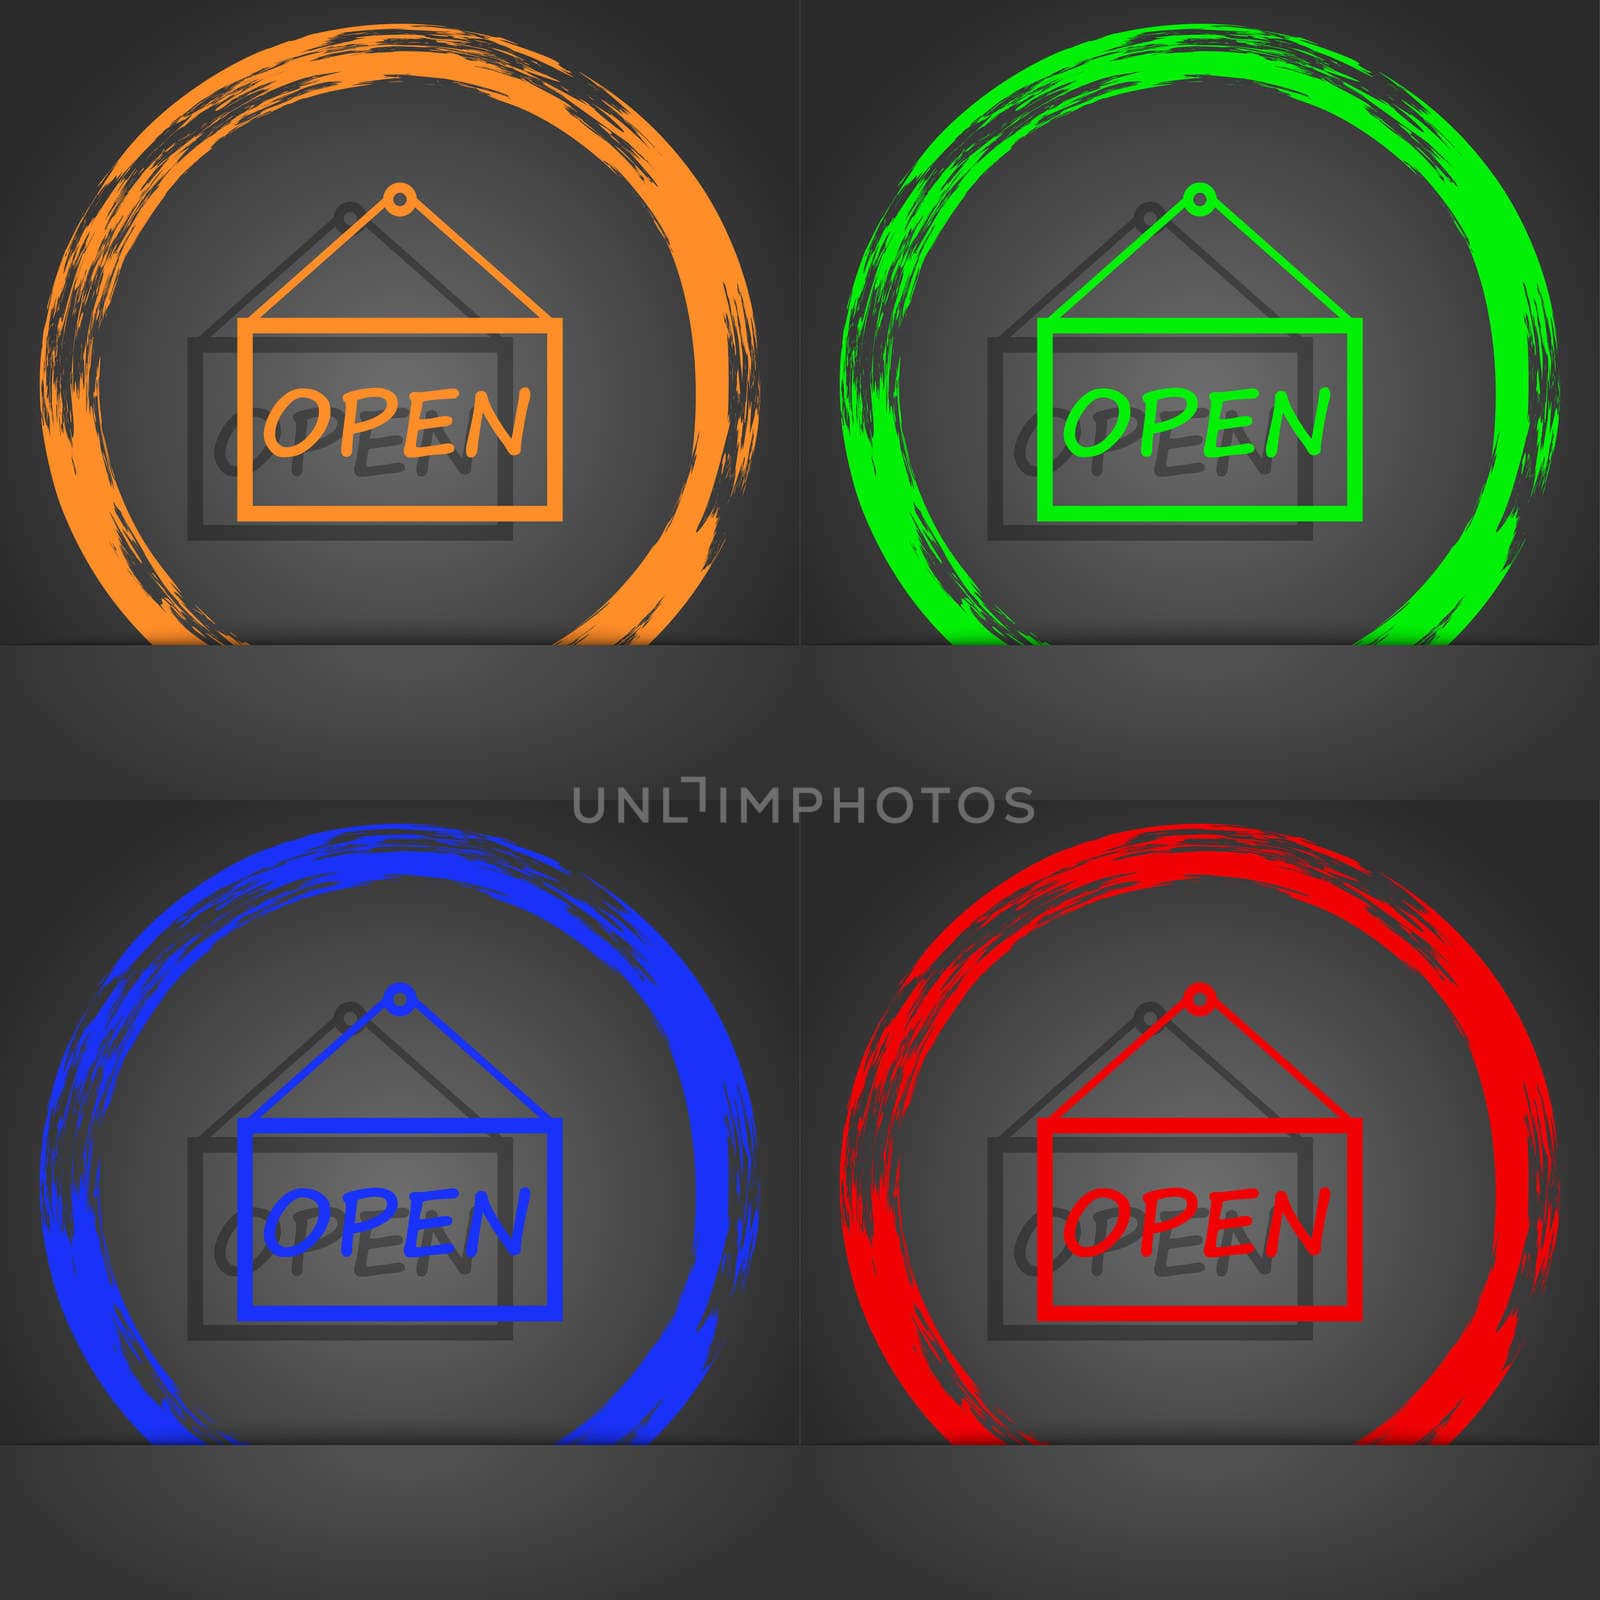 open icon sign. Fashionable modern style. In the orange, green, blue, red design. illustration